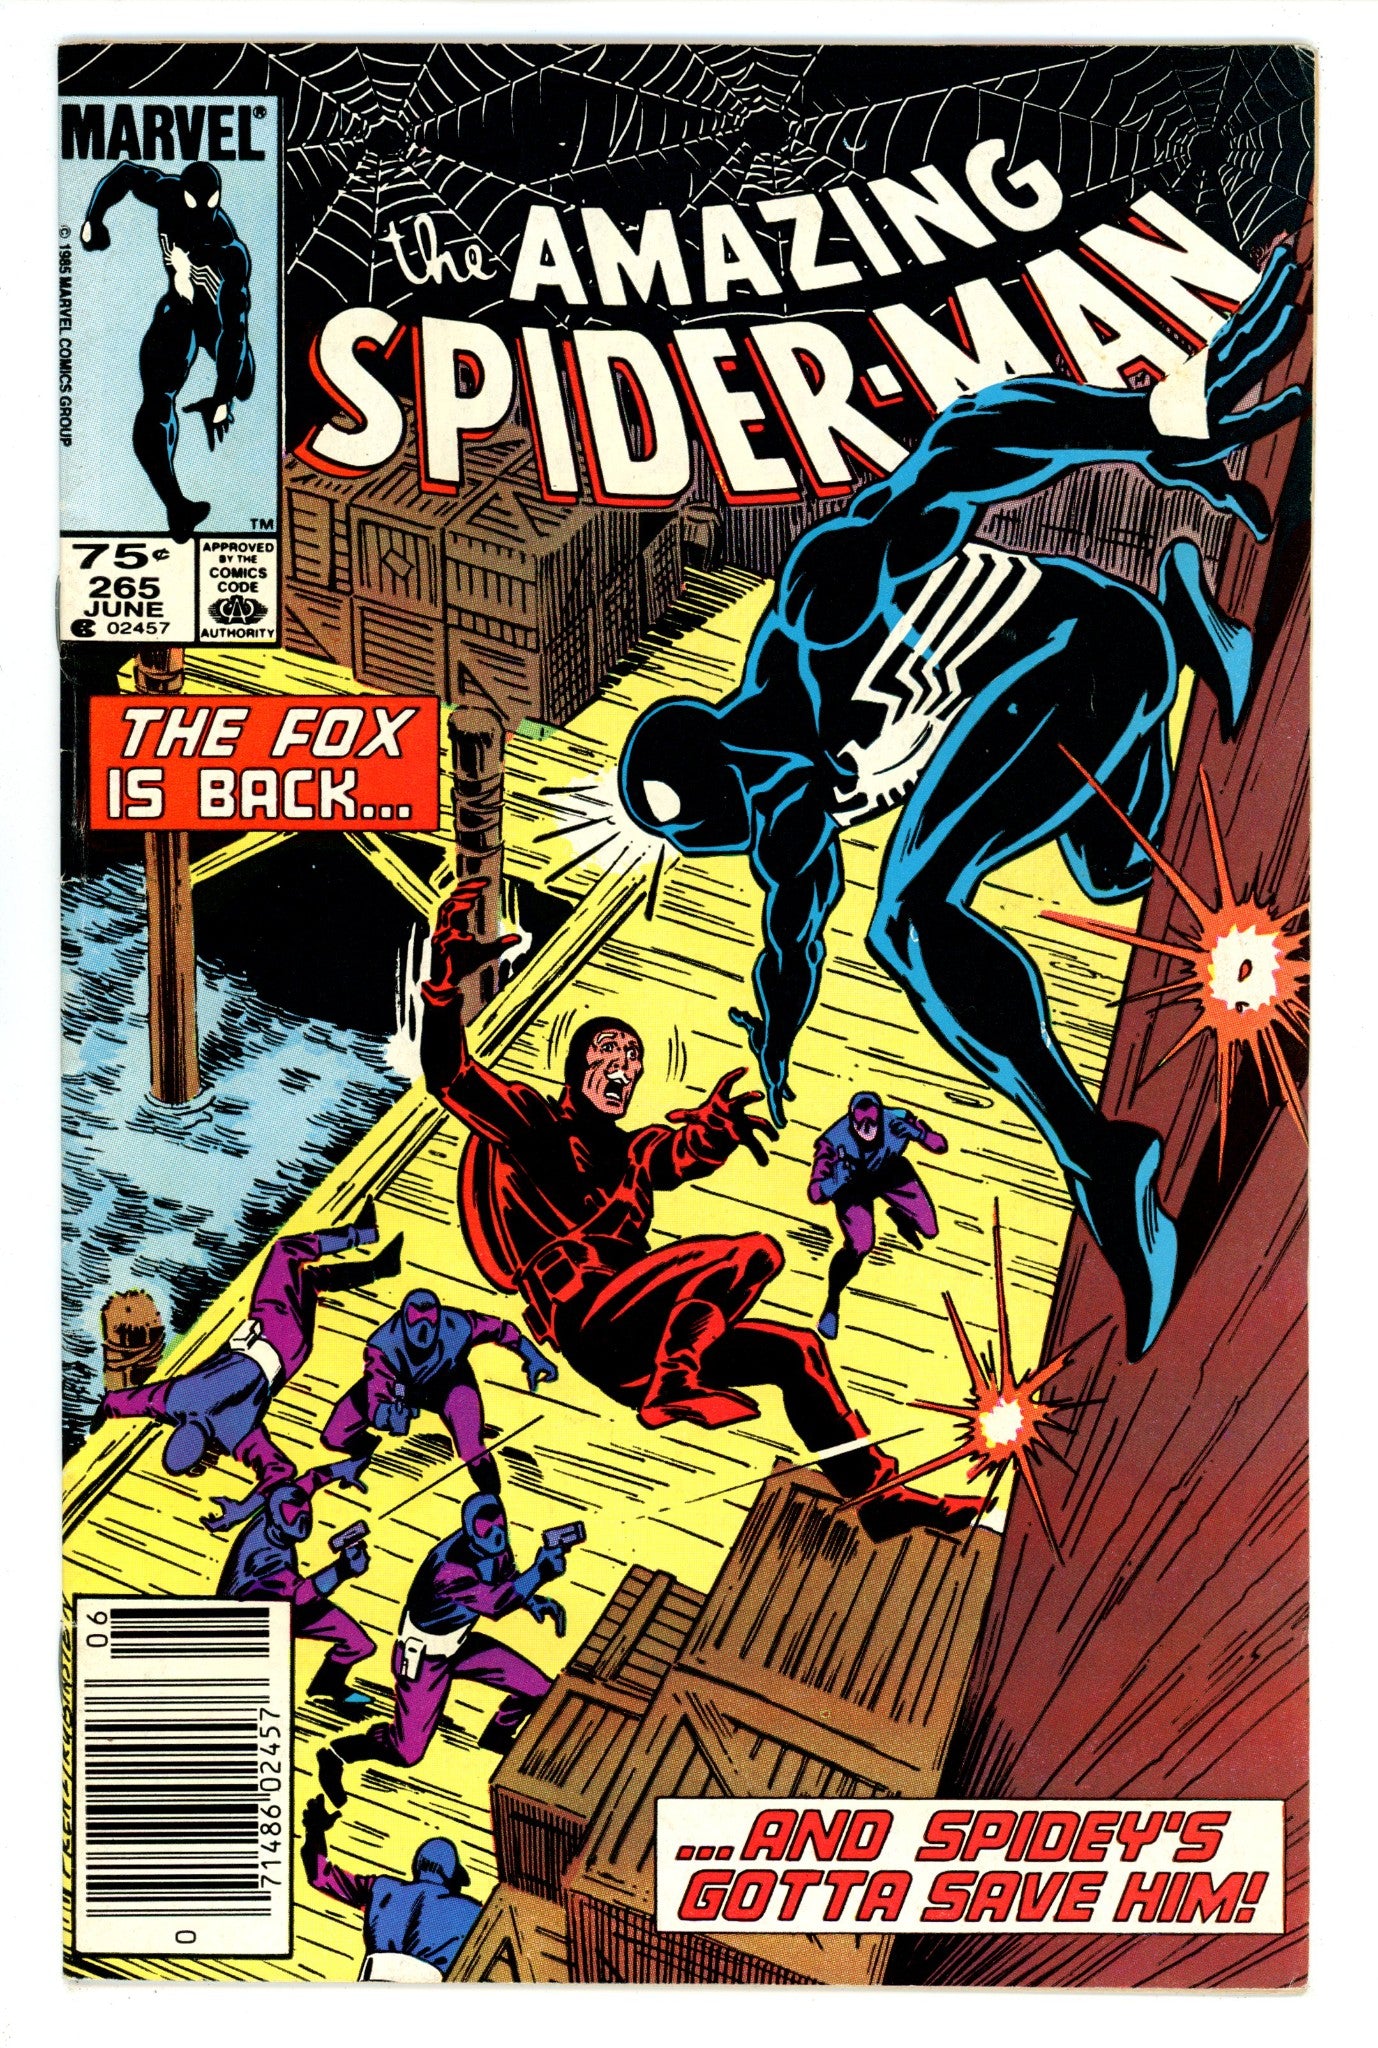 The Amazing Spider-Man Vol 1 265 FN+ (6.5) (1985) Canadian Price Variant 